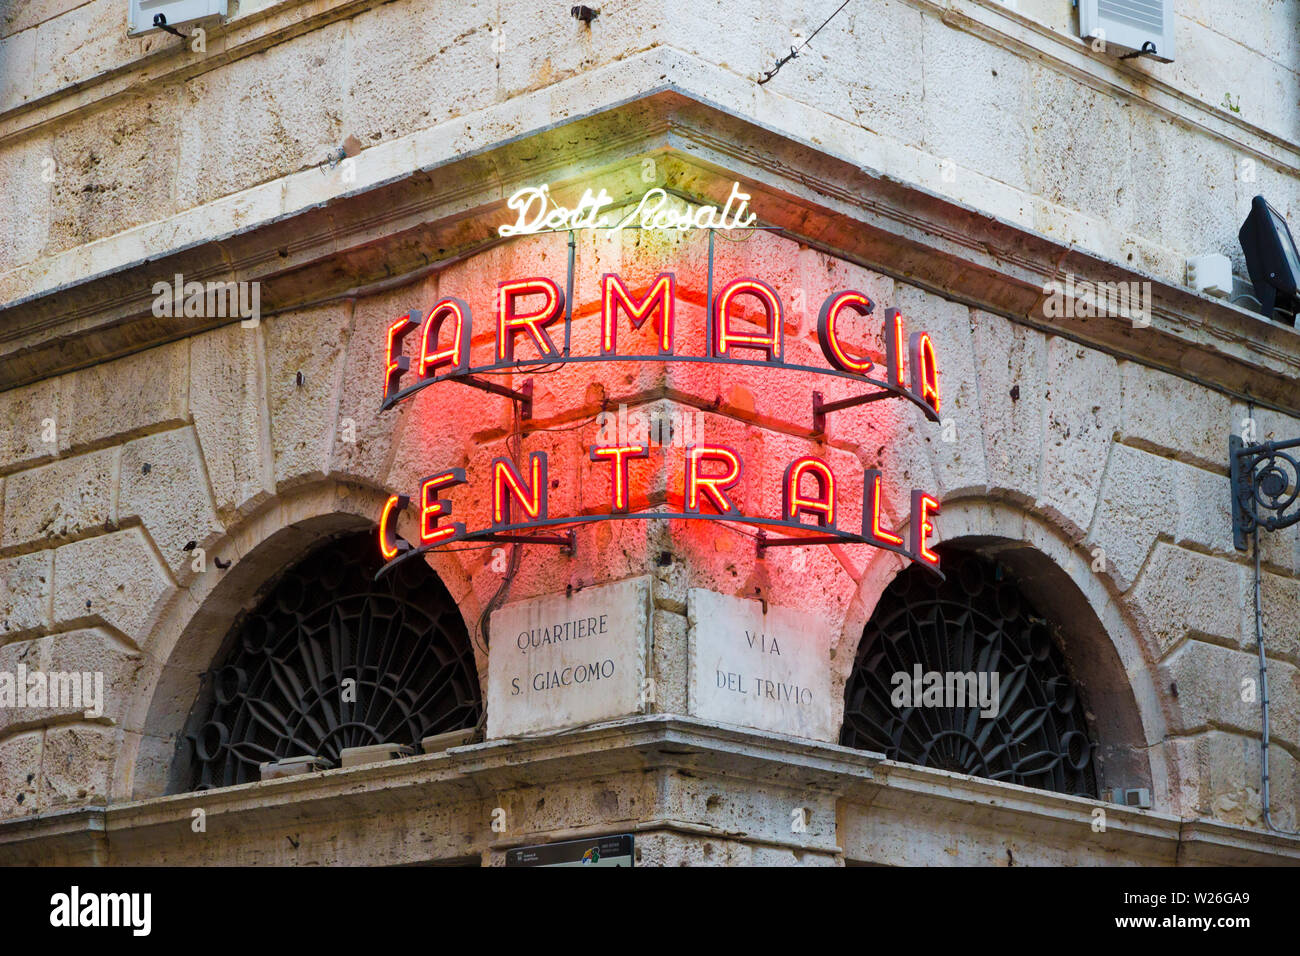 Ascoli Piceno, Italy - June 27, 2019: glowing neon sign in the old town readings: 'Doctor Rosati Central pharmacy' at sunset Stock Photo